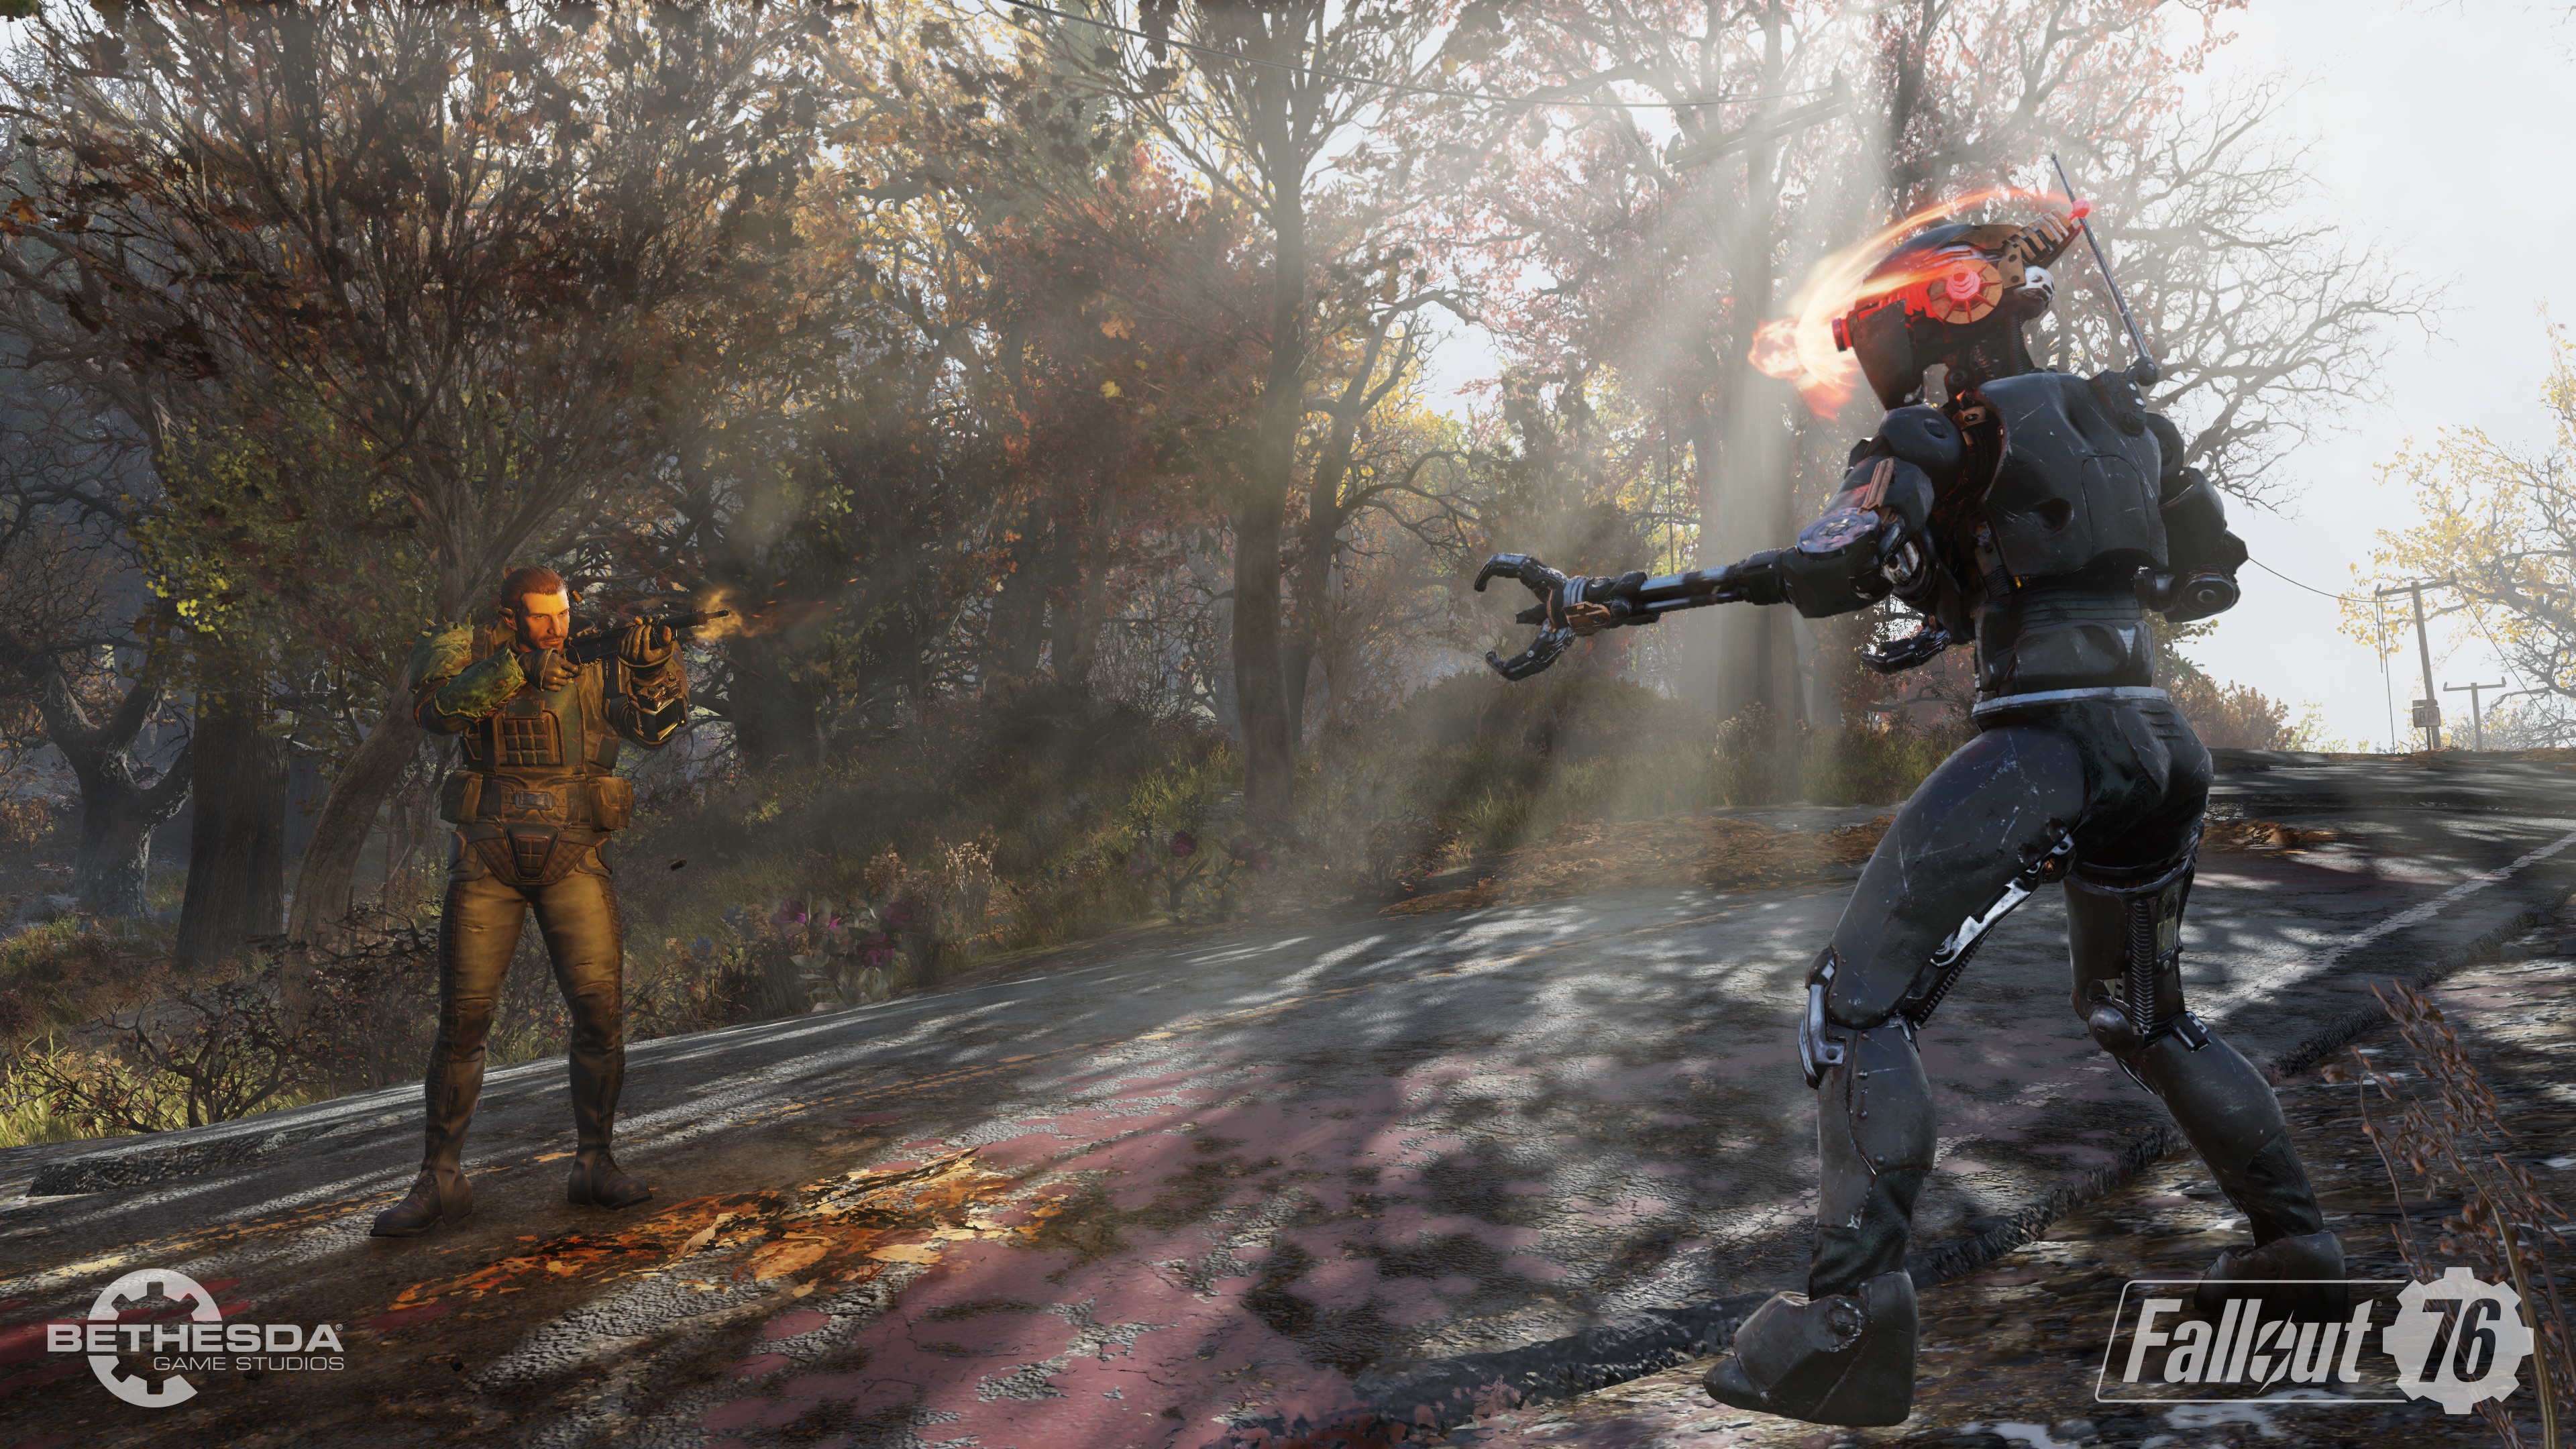 Todd Howard admits that the team knew Fallout 76 was not a high Metacritic  game at launch, but it's about what the game becomes